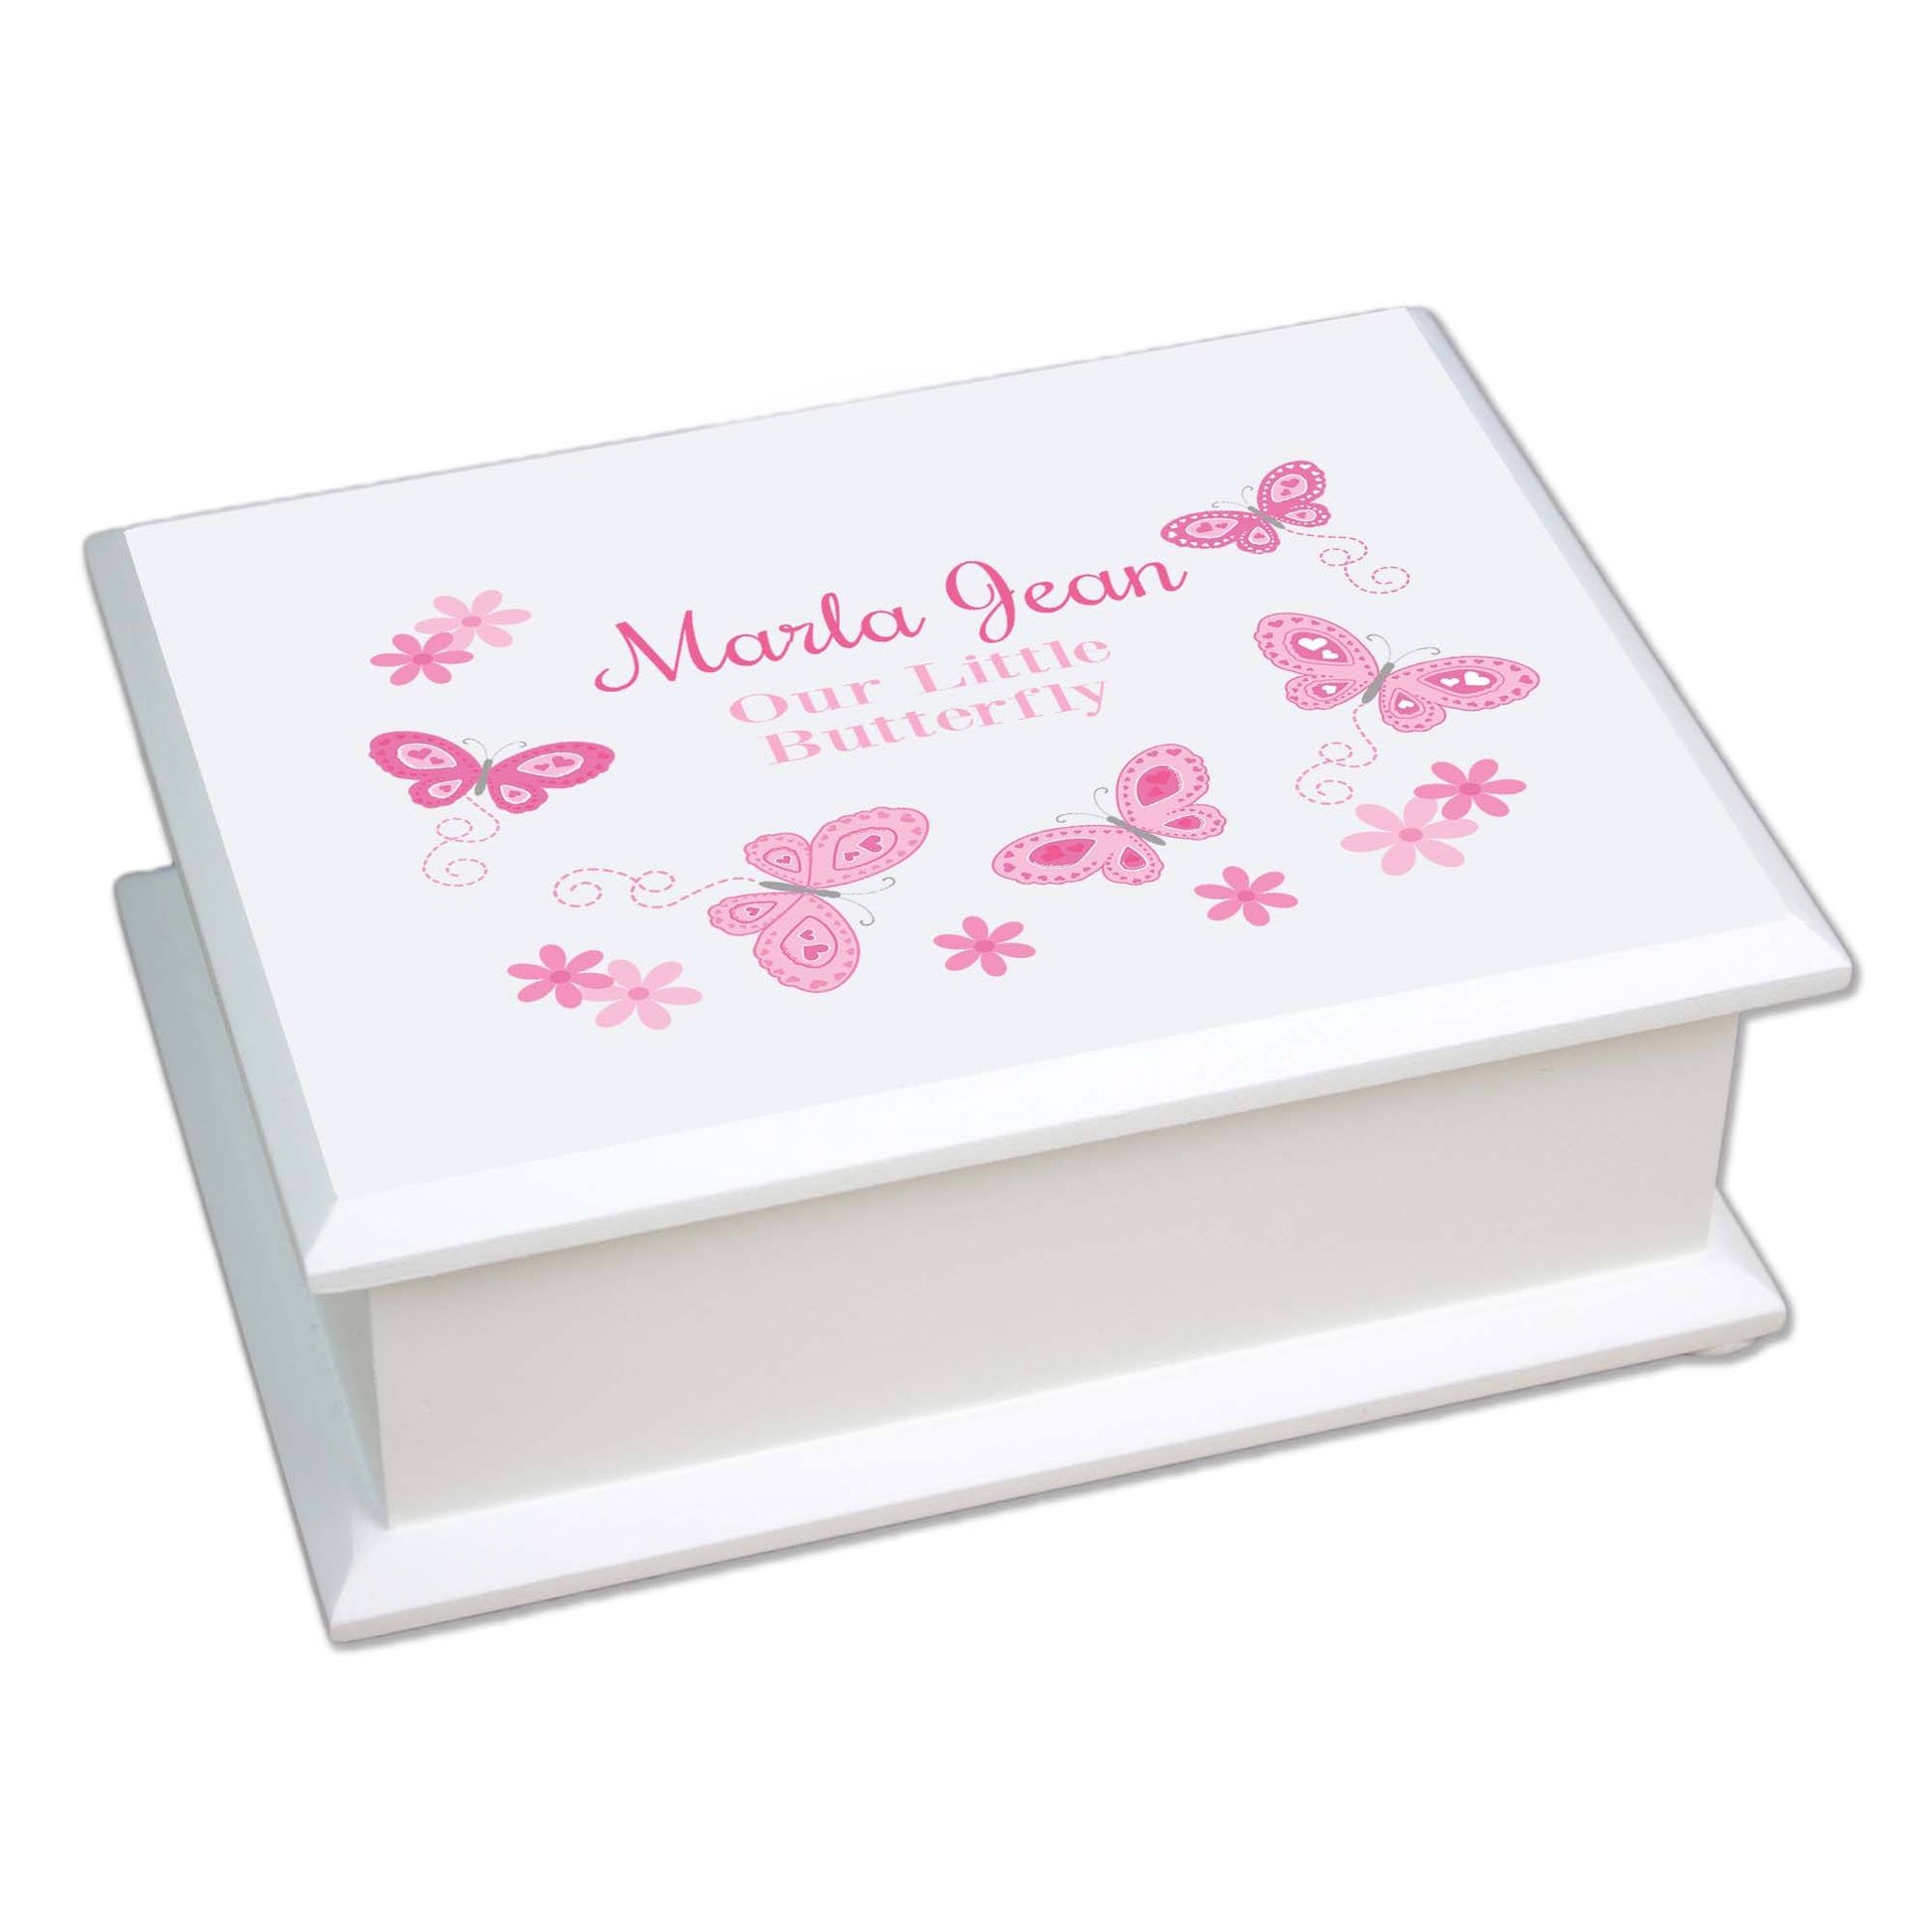 Personalized Lift Top Jewelry Box with Butterflies Pink design